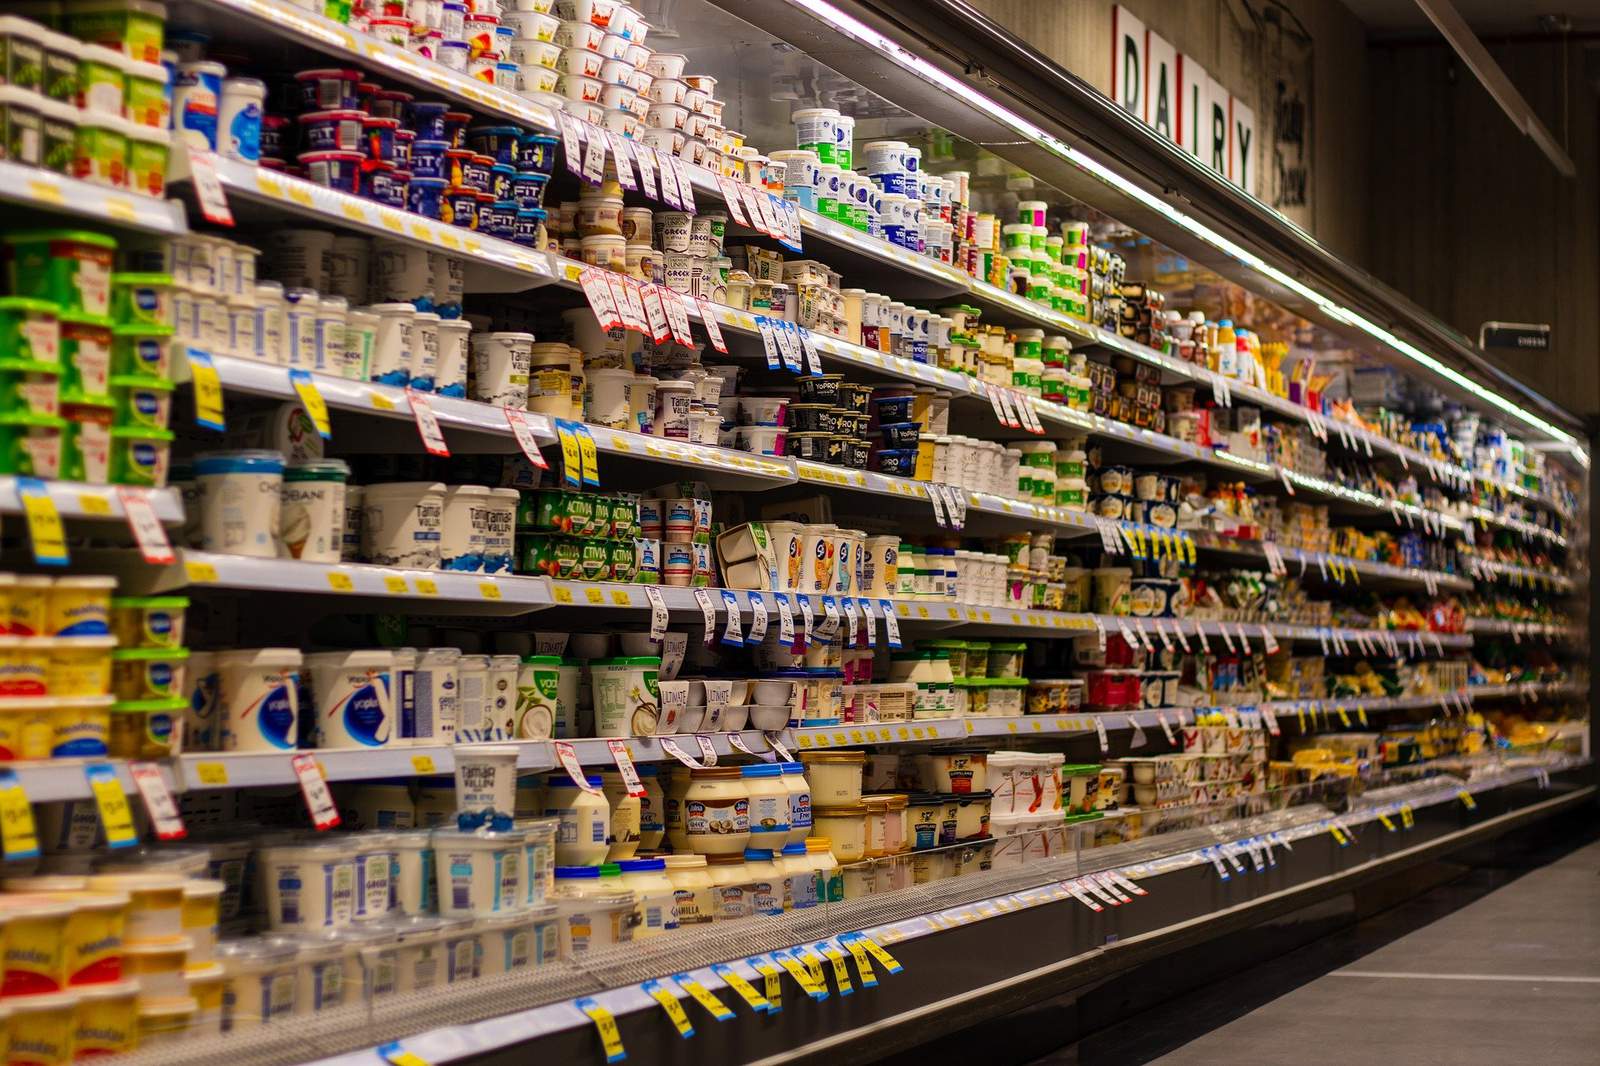 These items are hard to find at local grocery stores, according to Houstonians